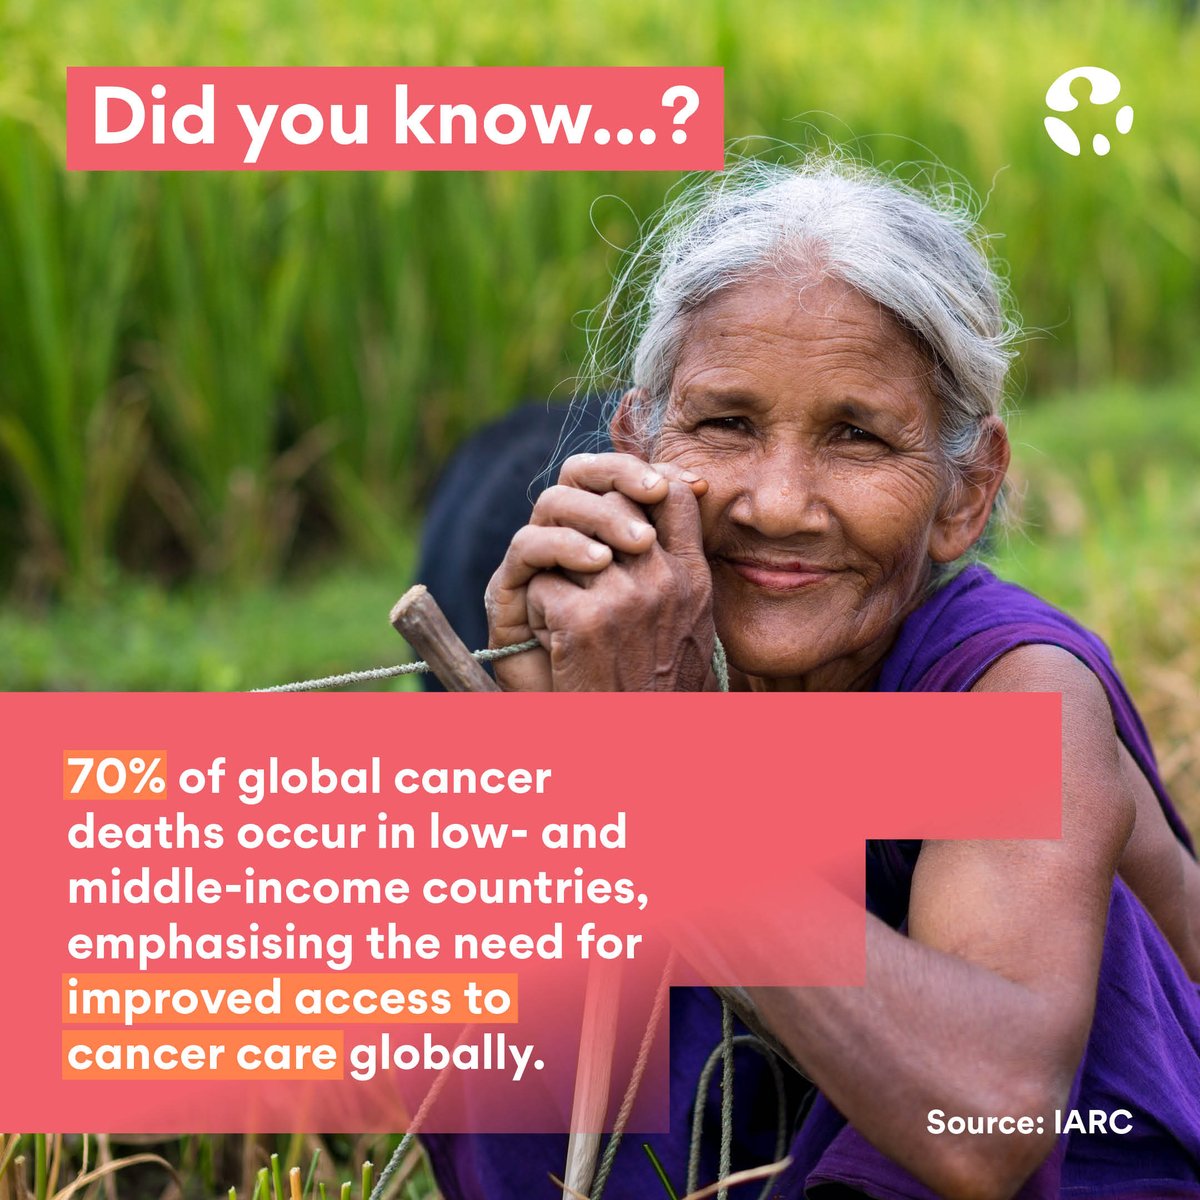 📣 It's #WorldCancerDay📣 We recognise the importance of quality #IME to support #oncology HCPs in delivering the best care to their patients. Let's work together to #CloseTheCareGap for patients worldwide. Find out how you can take action ➡️ worldcancerday.org/about/2022-202… #MedEd